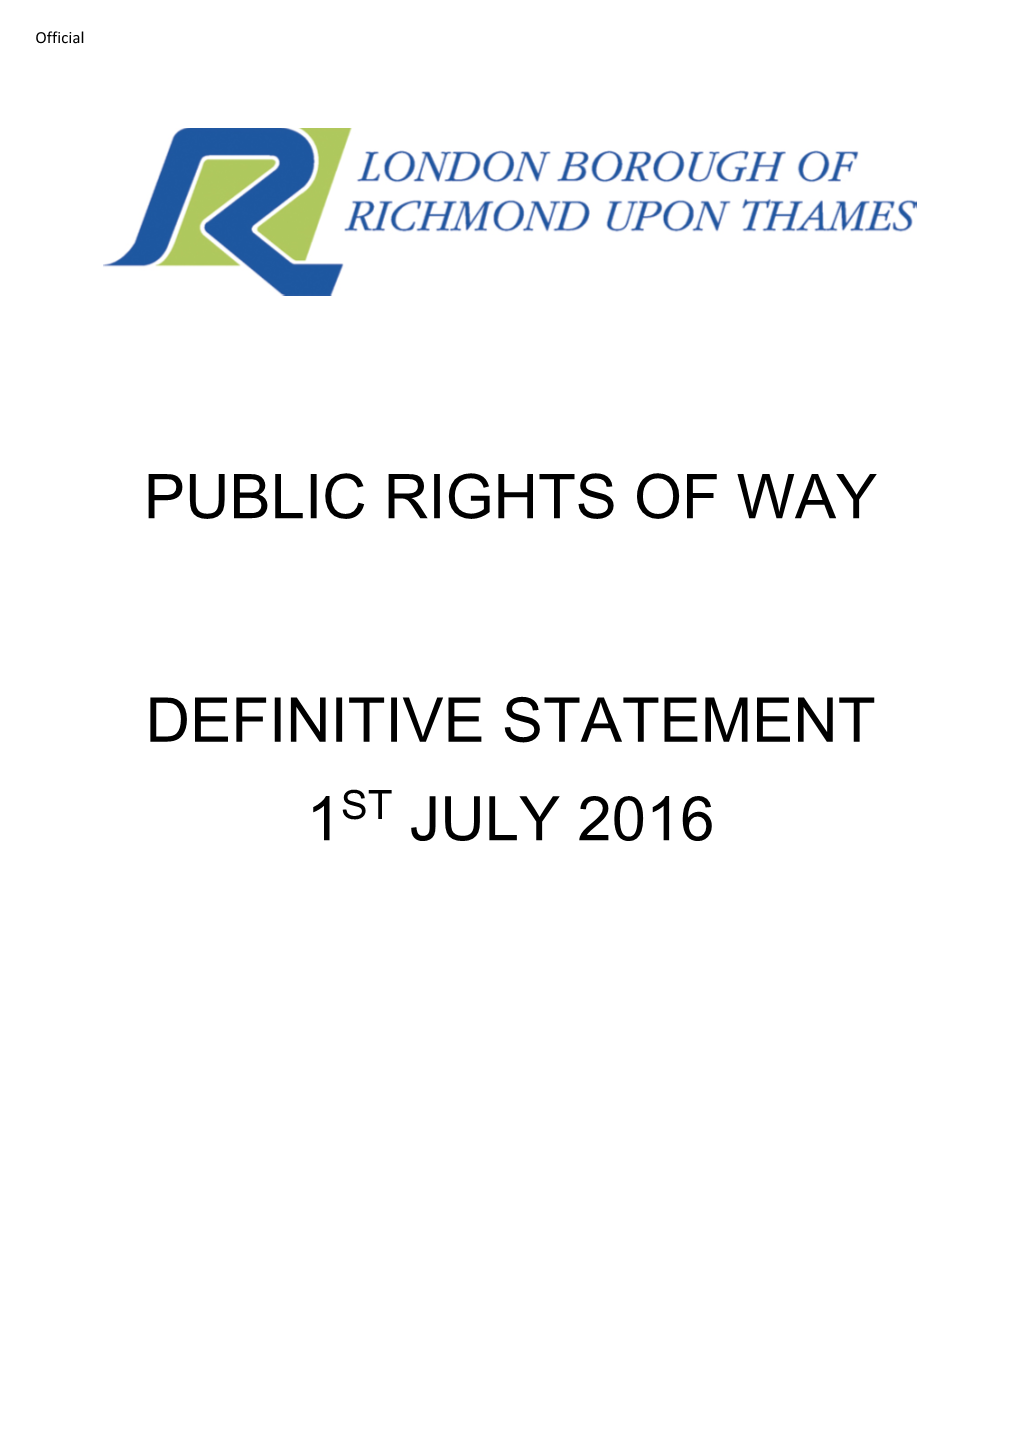 Public Rights of Way Definitive Statement 1 July 2016